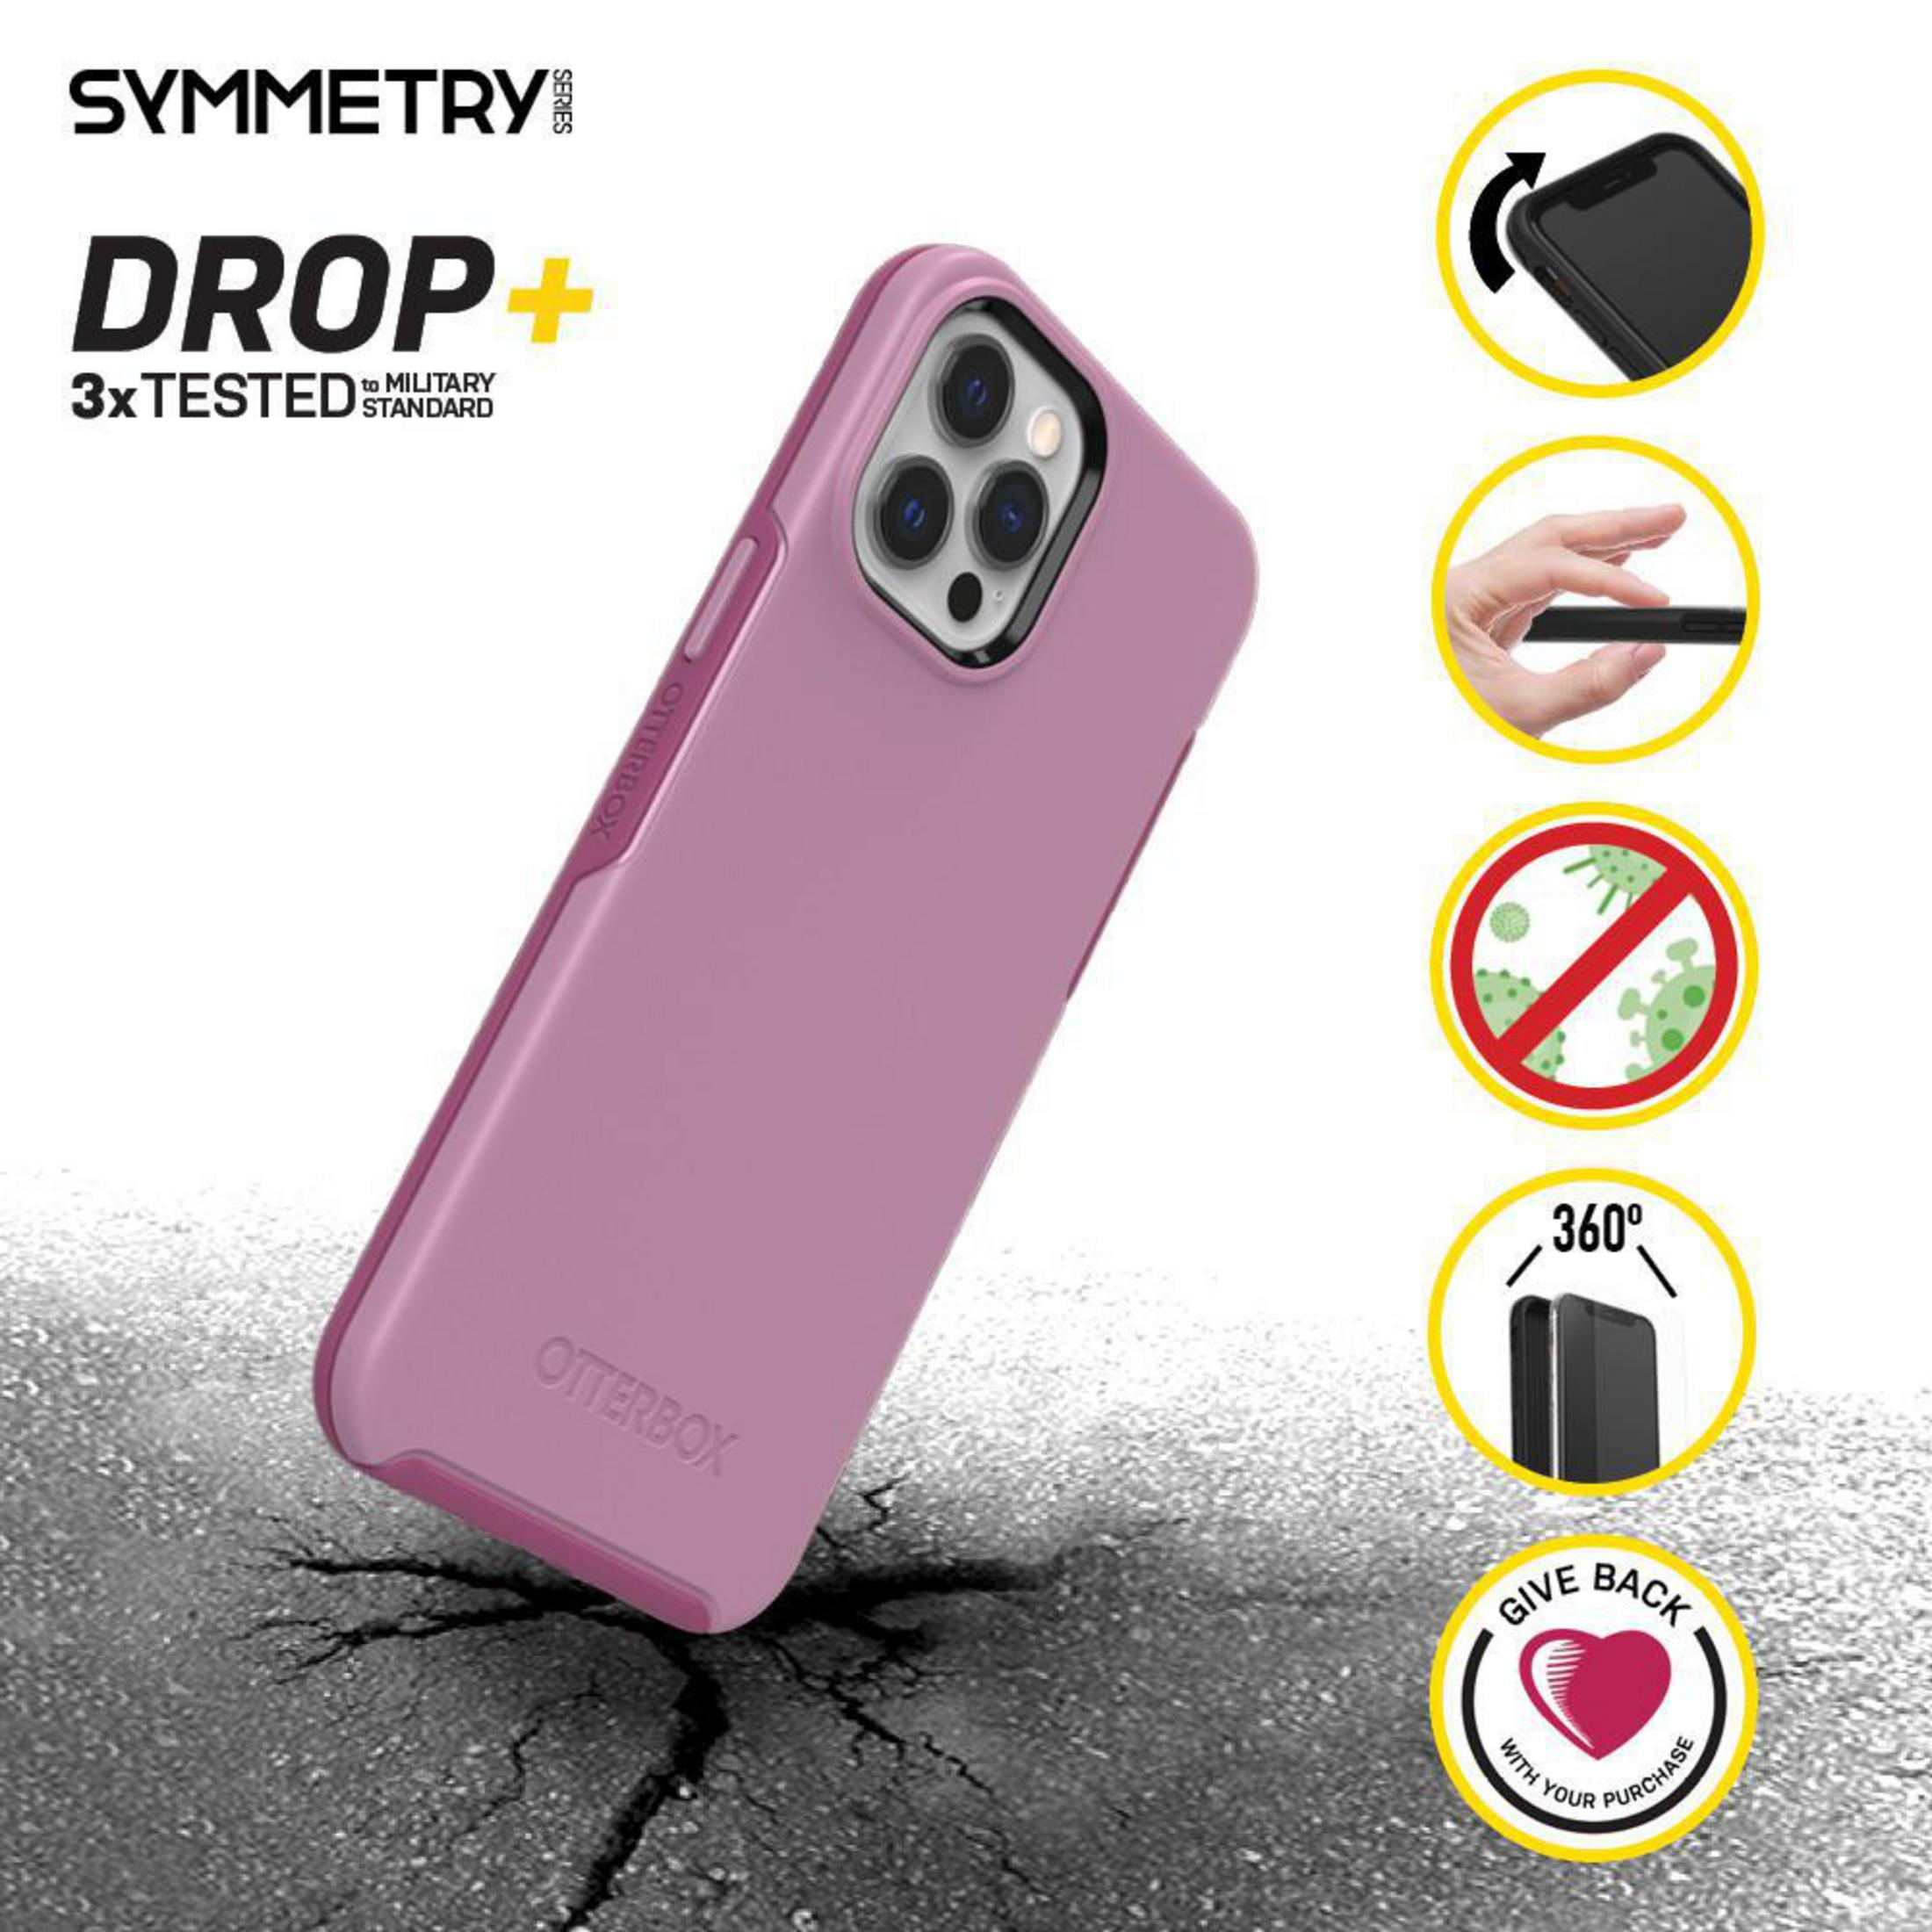 OTTERBOX 77-65464 PRO PINK, Pink MAX POP Backcover, iPhone Max, 12 CAKE 12 SYMMETRY Pro IP Apple